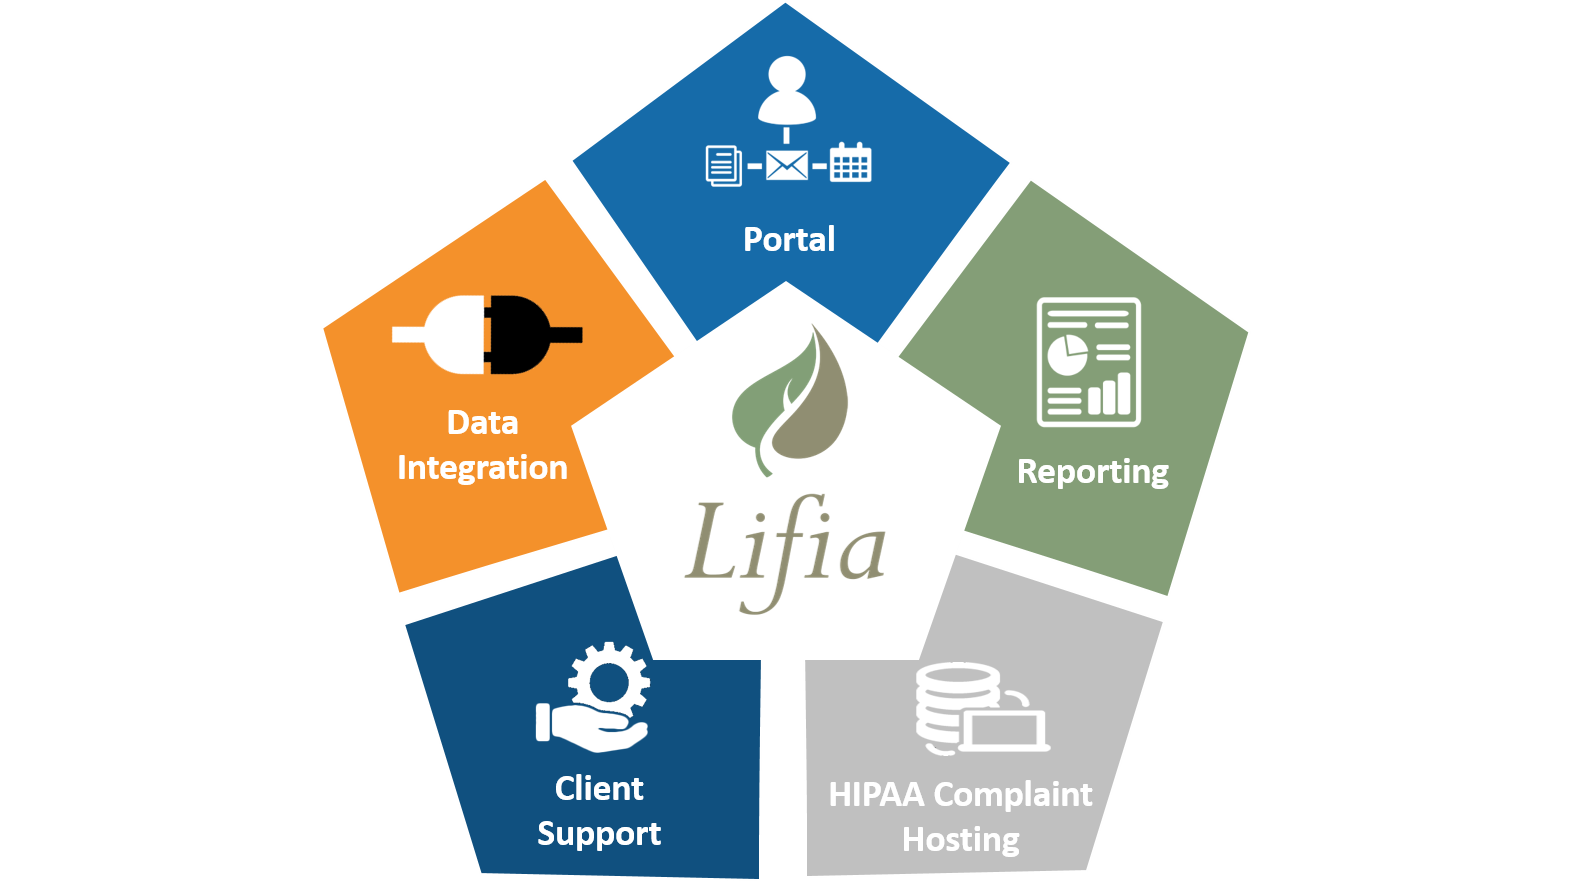 Lifia is a powerful electronic content management and eligibility determination tools that lets you monitor, report, integrate and support your clients.